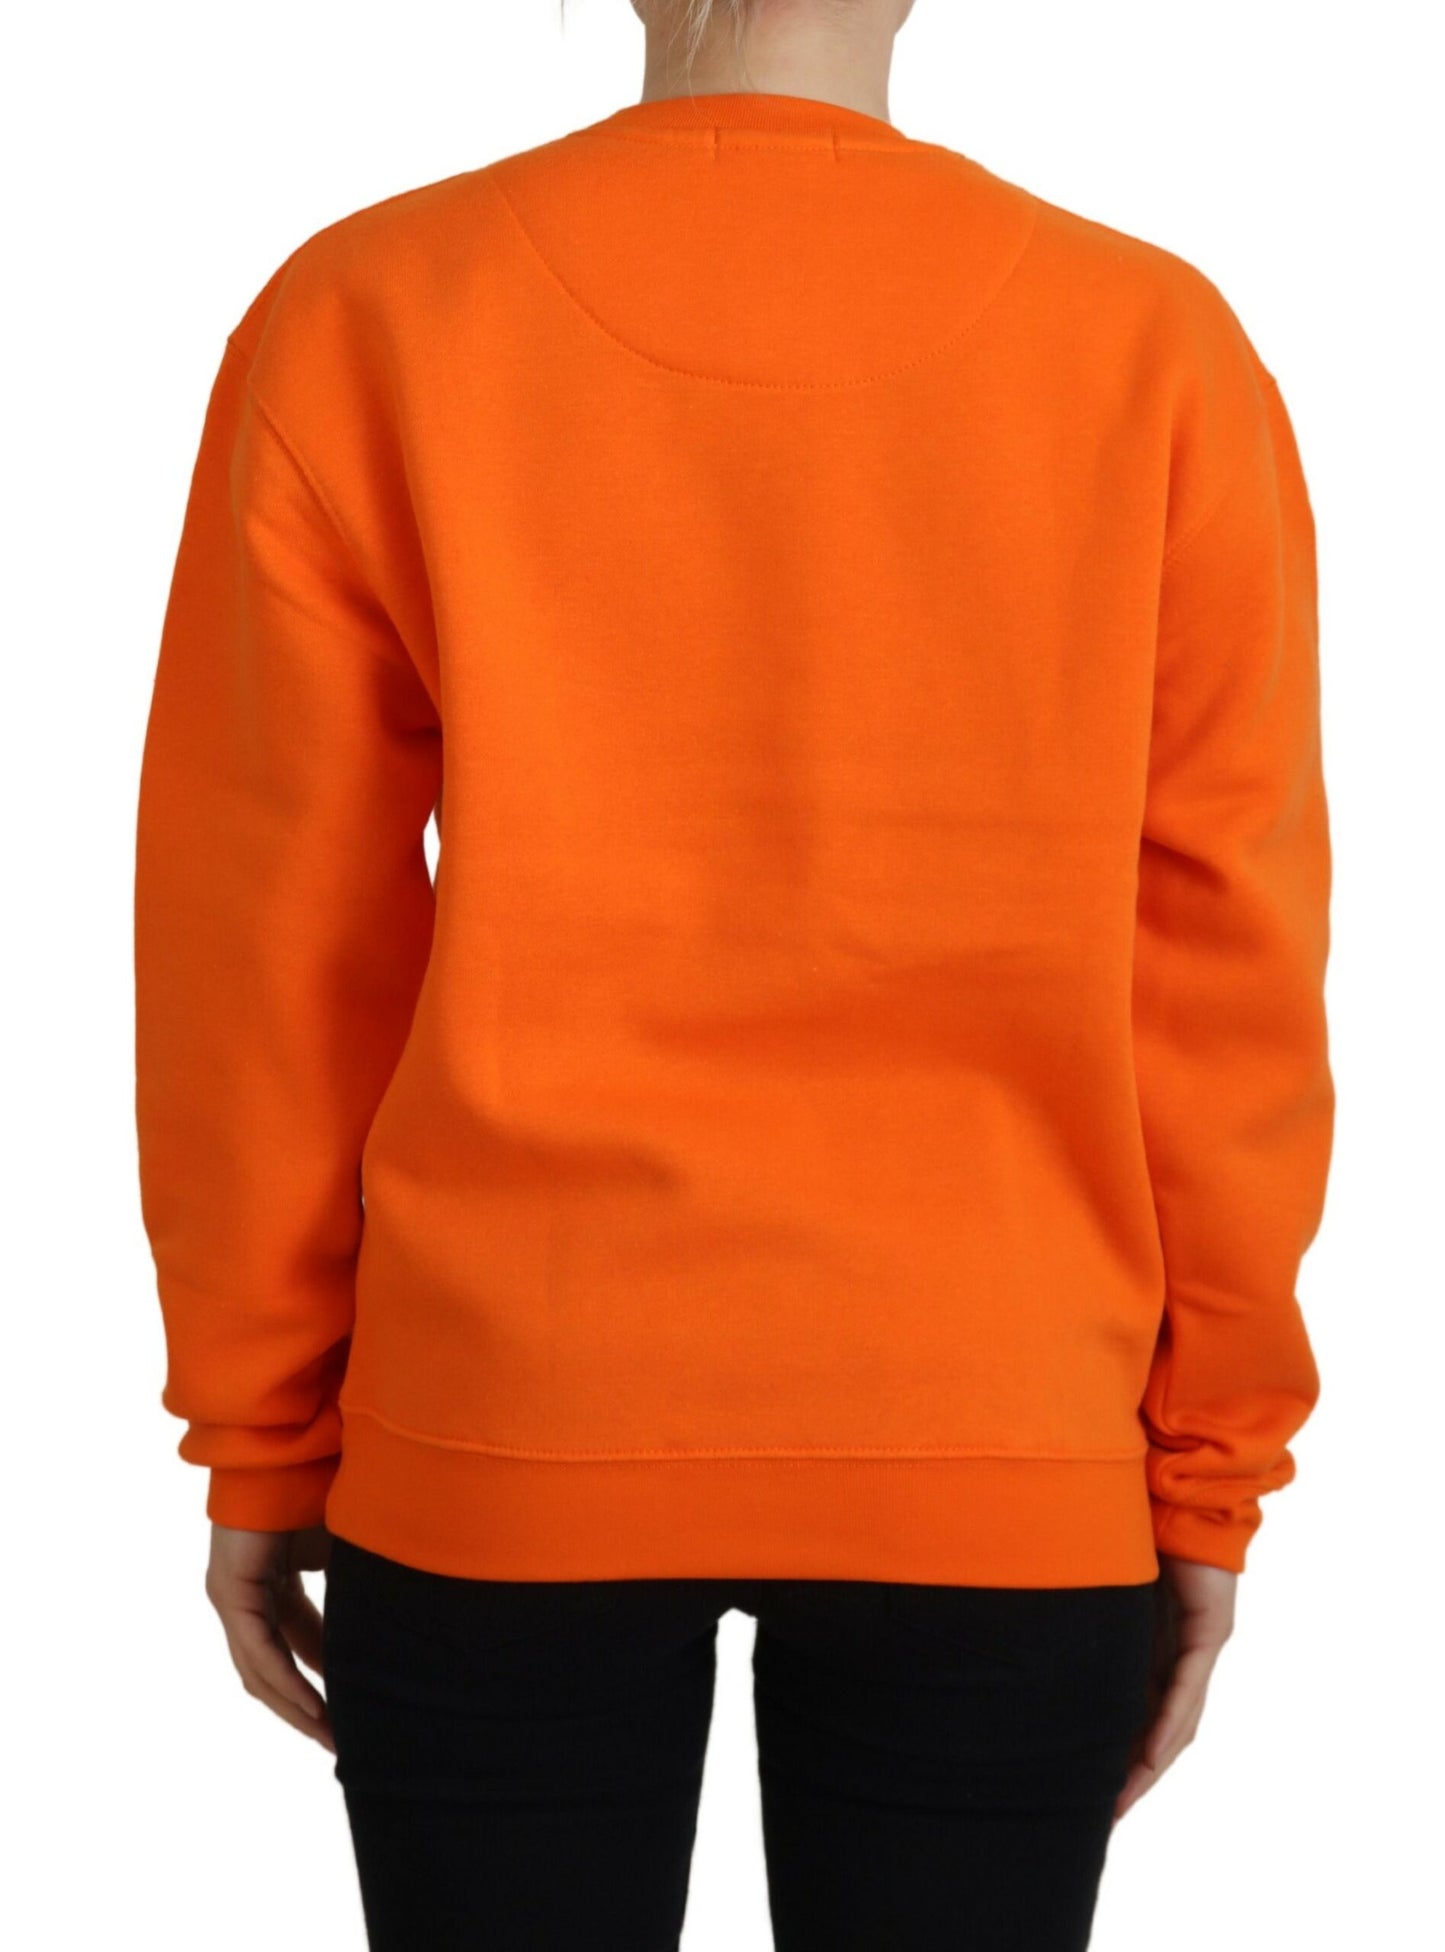 Chic Orange Printed Long Sleeve Pullover Sweater